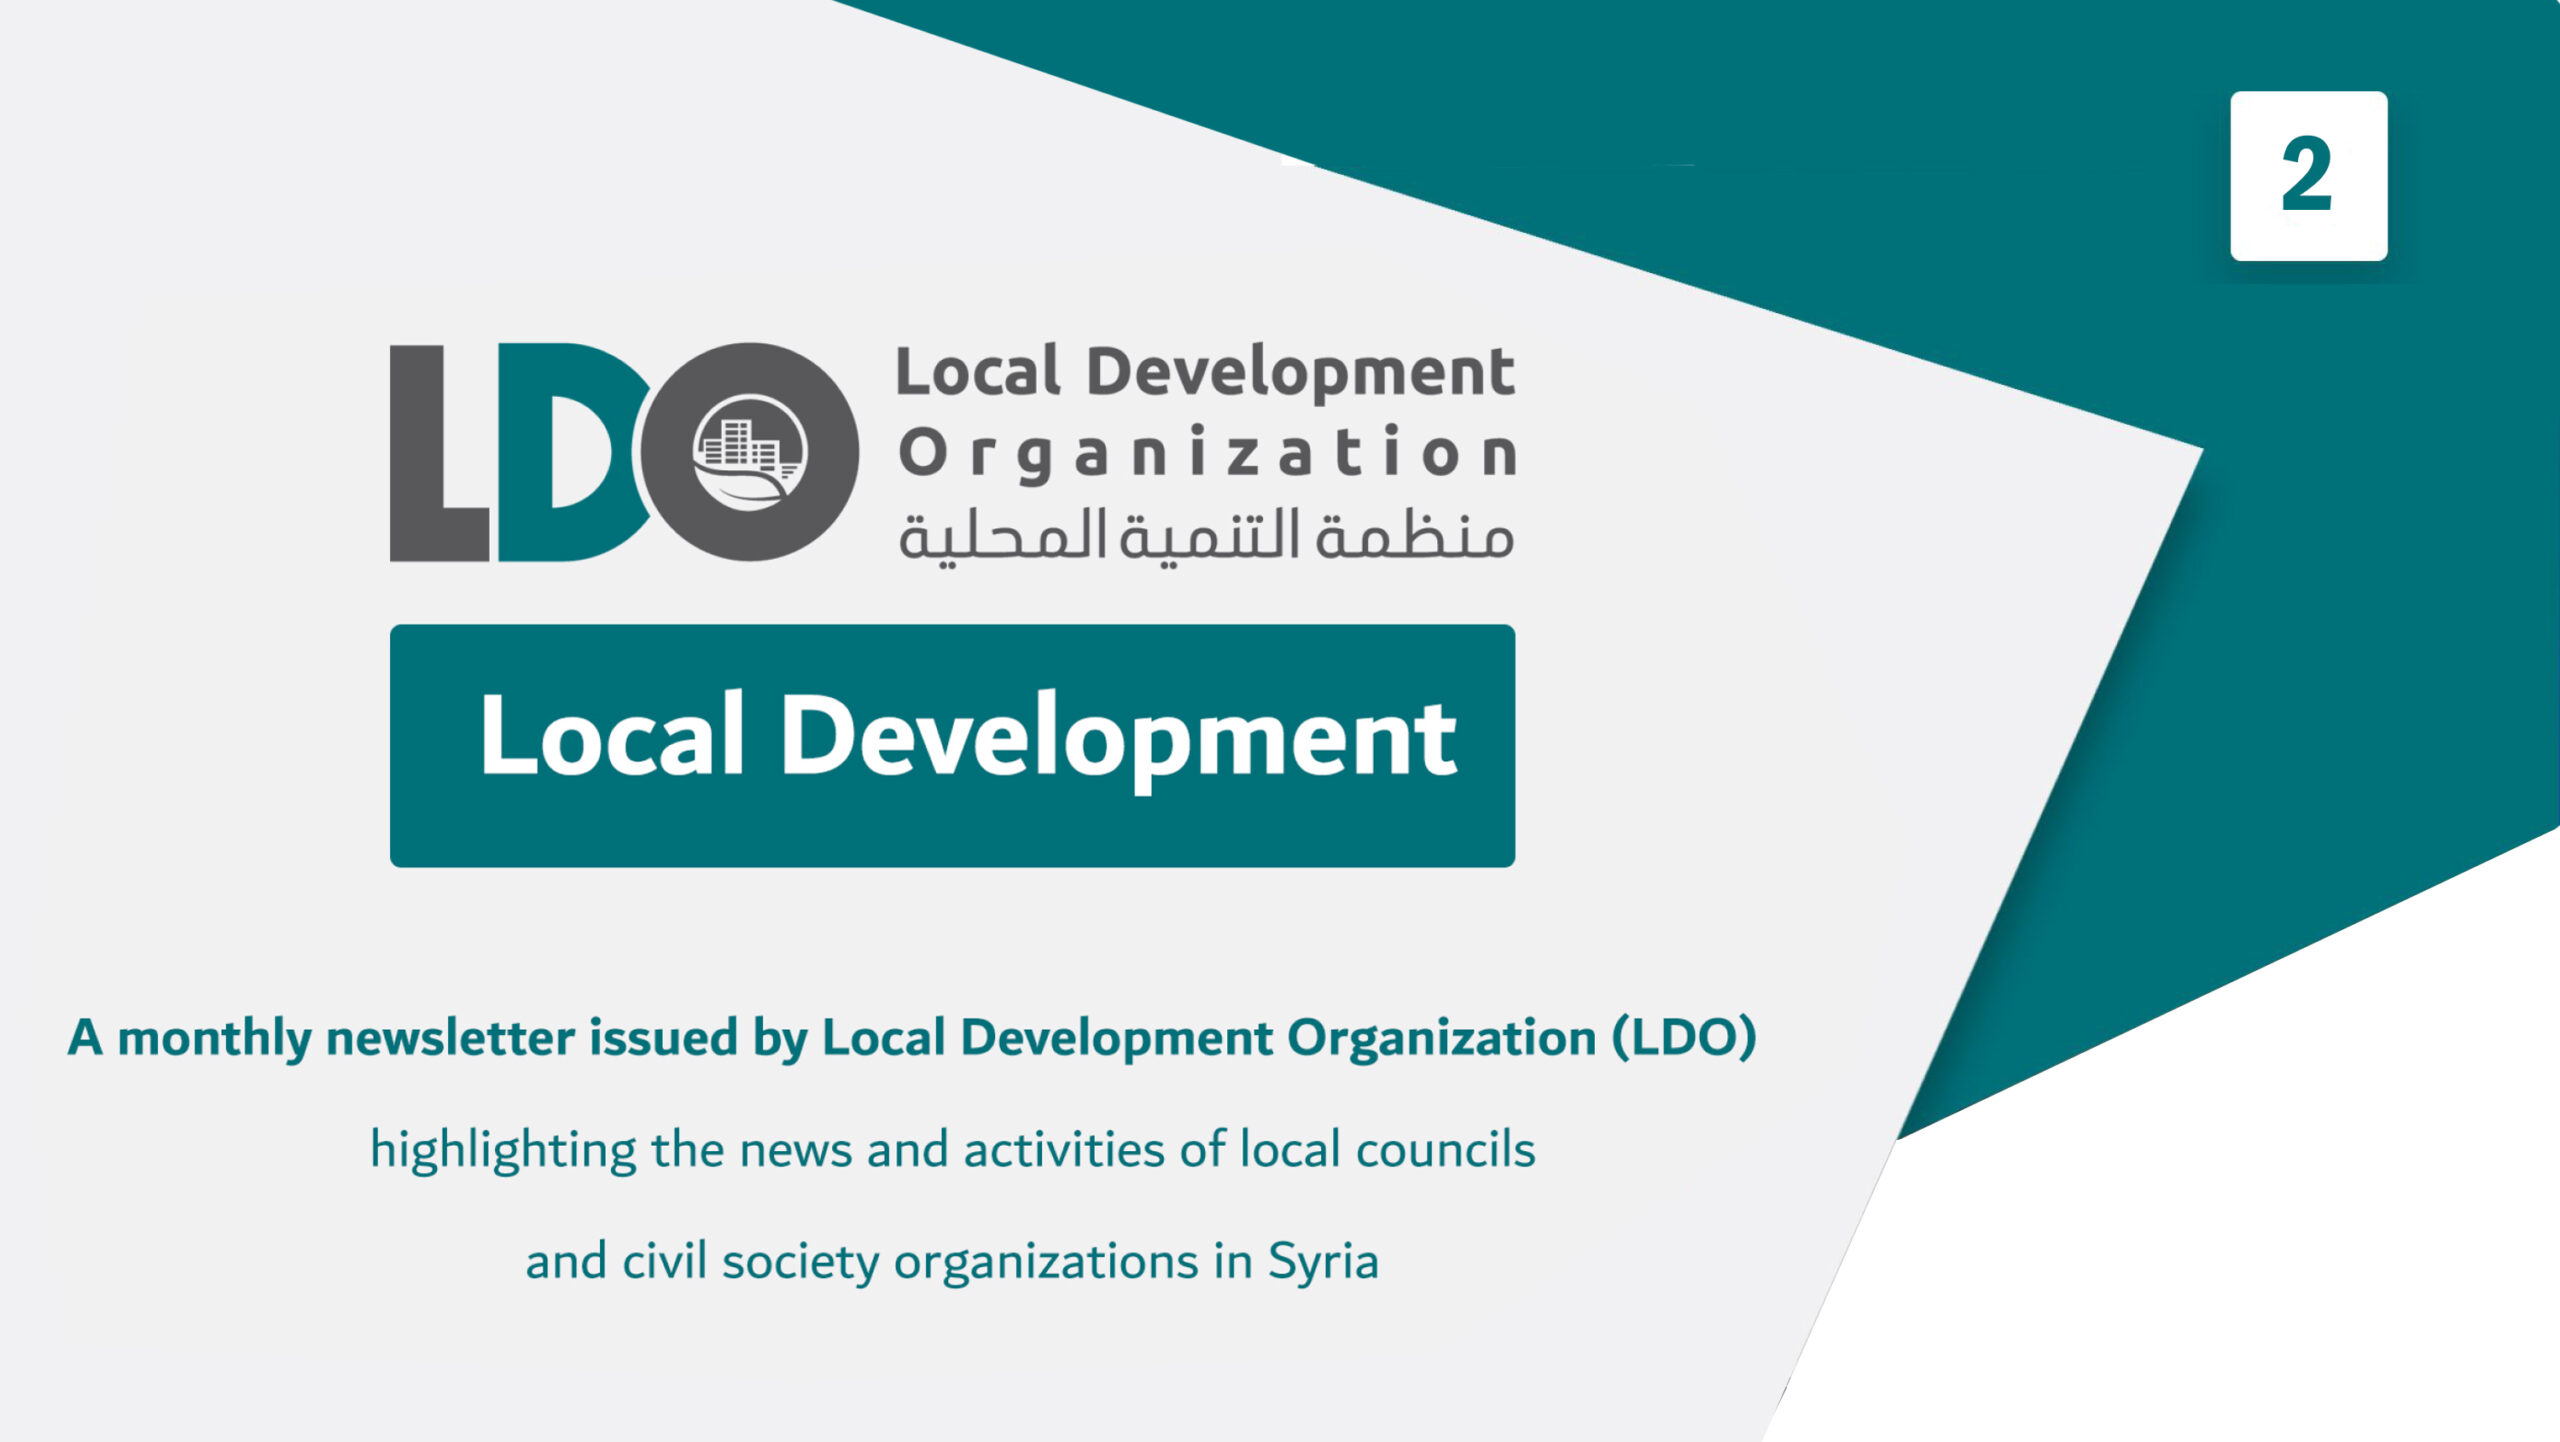 The second issue – Local Development